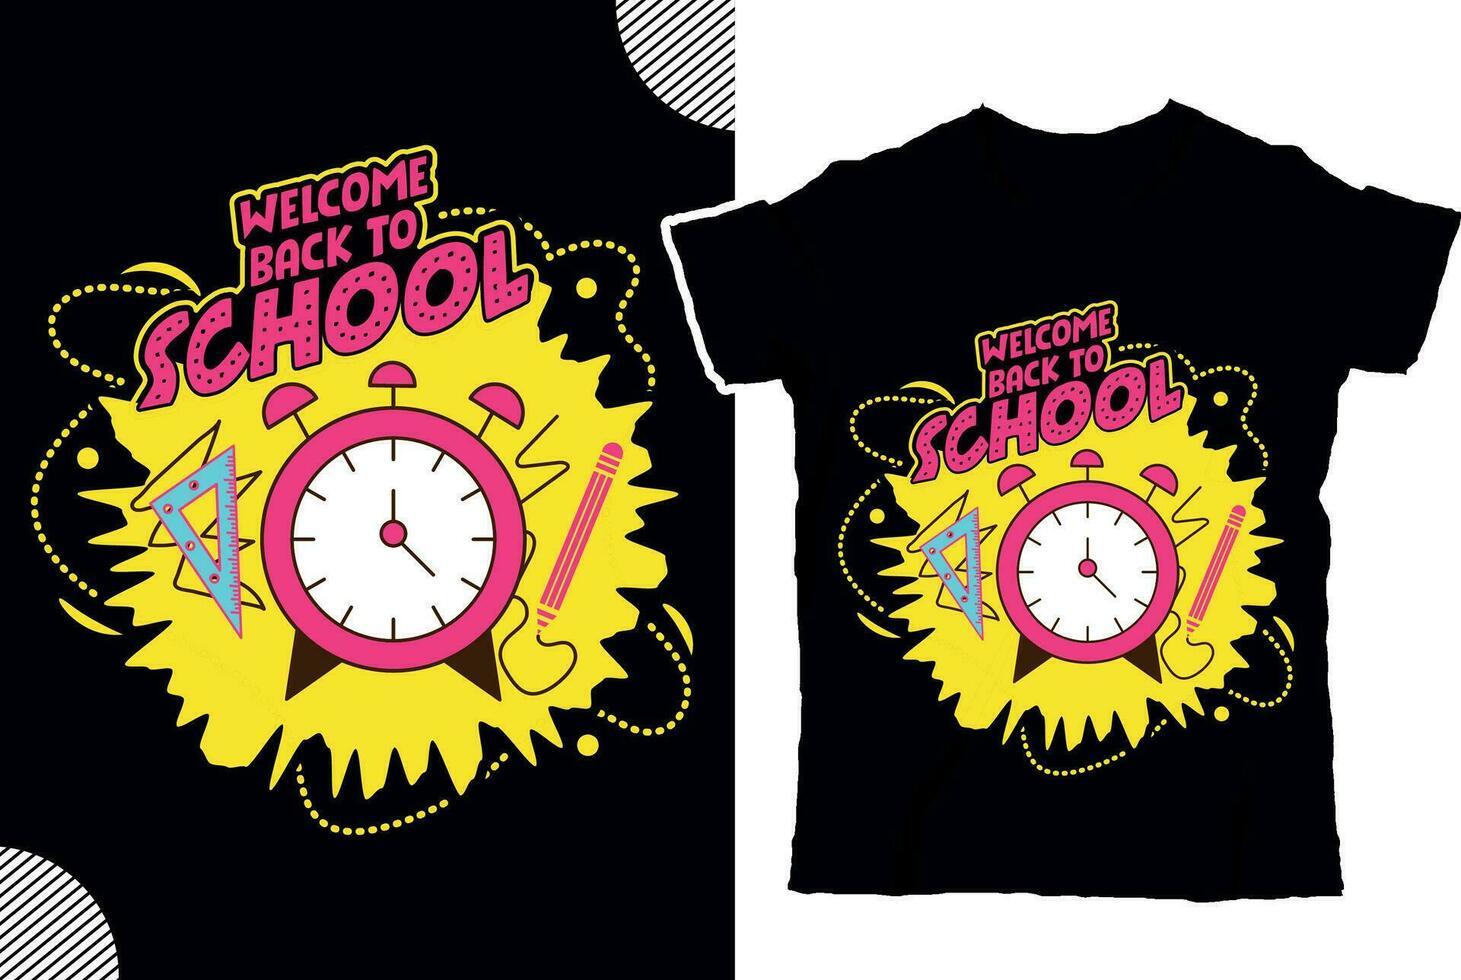 Welcome back to school, t shirt design vector